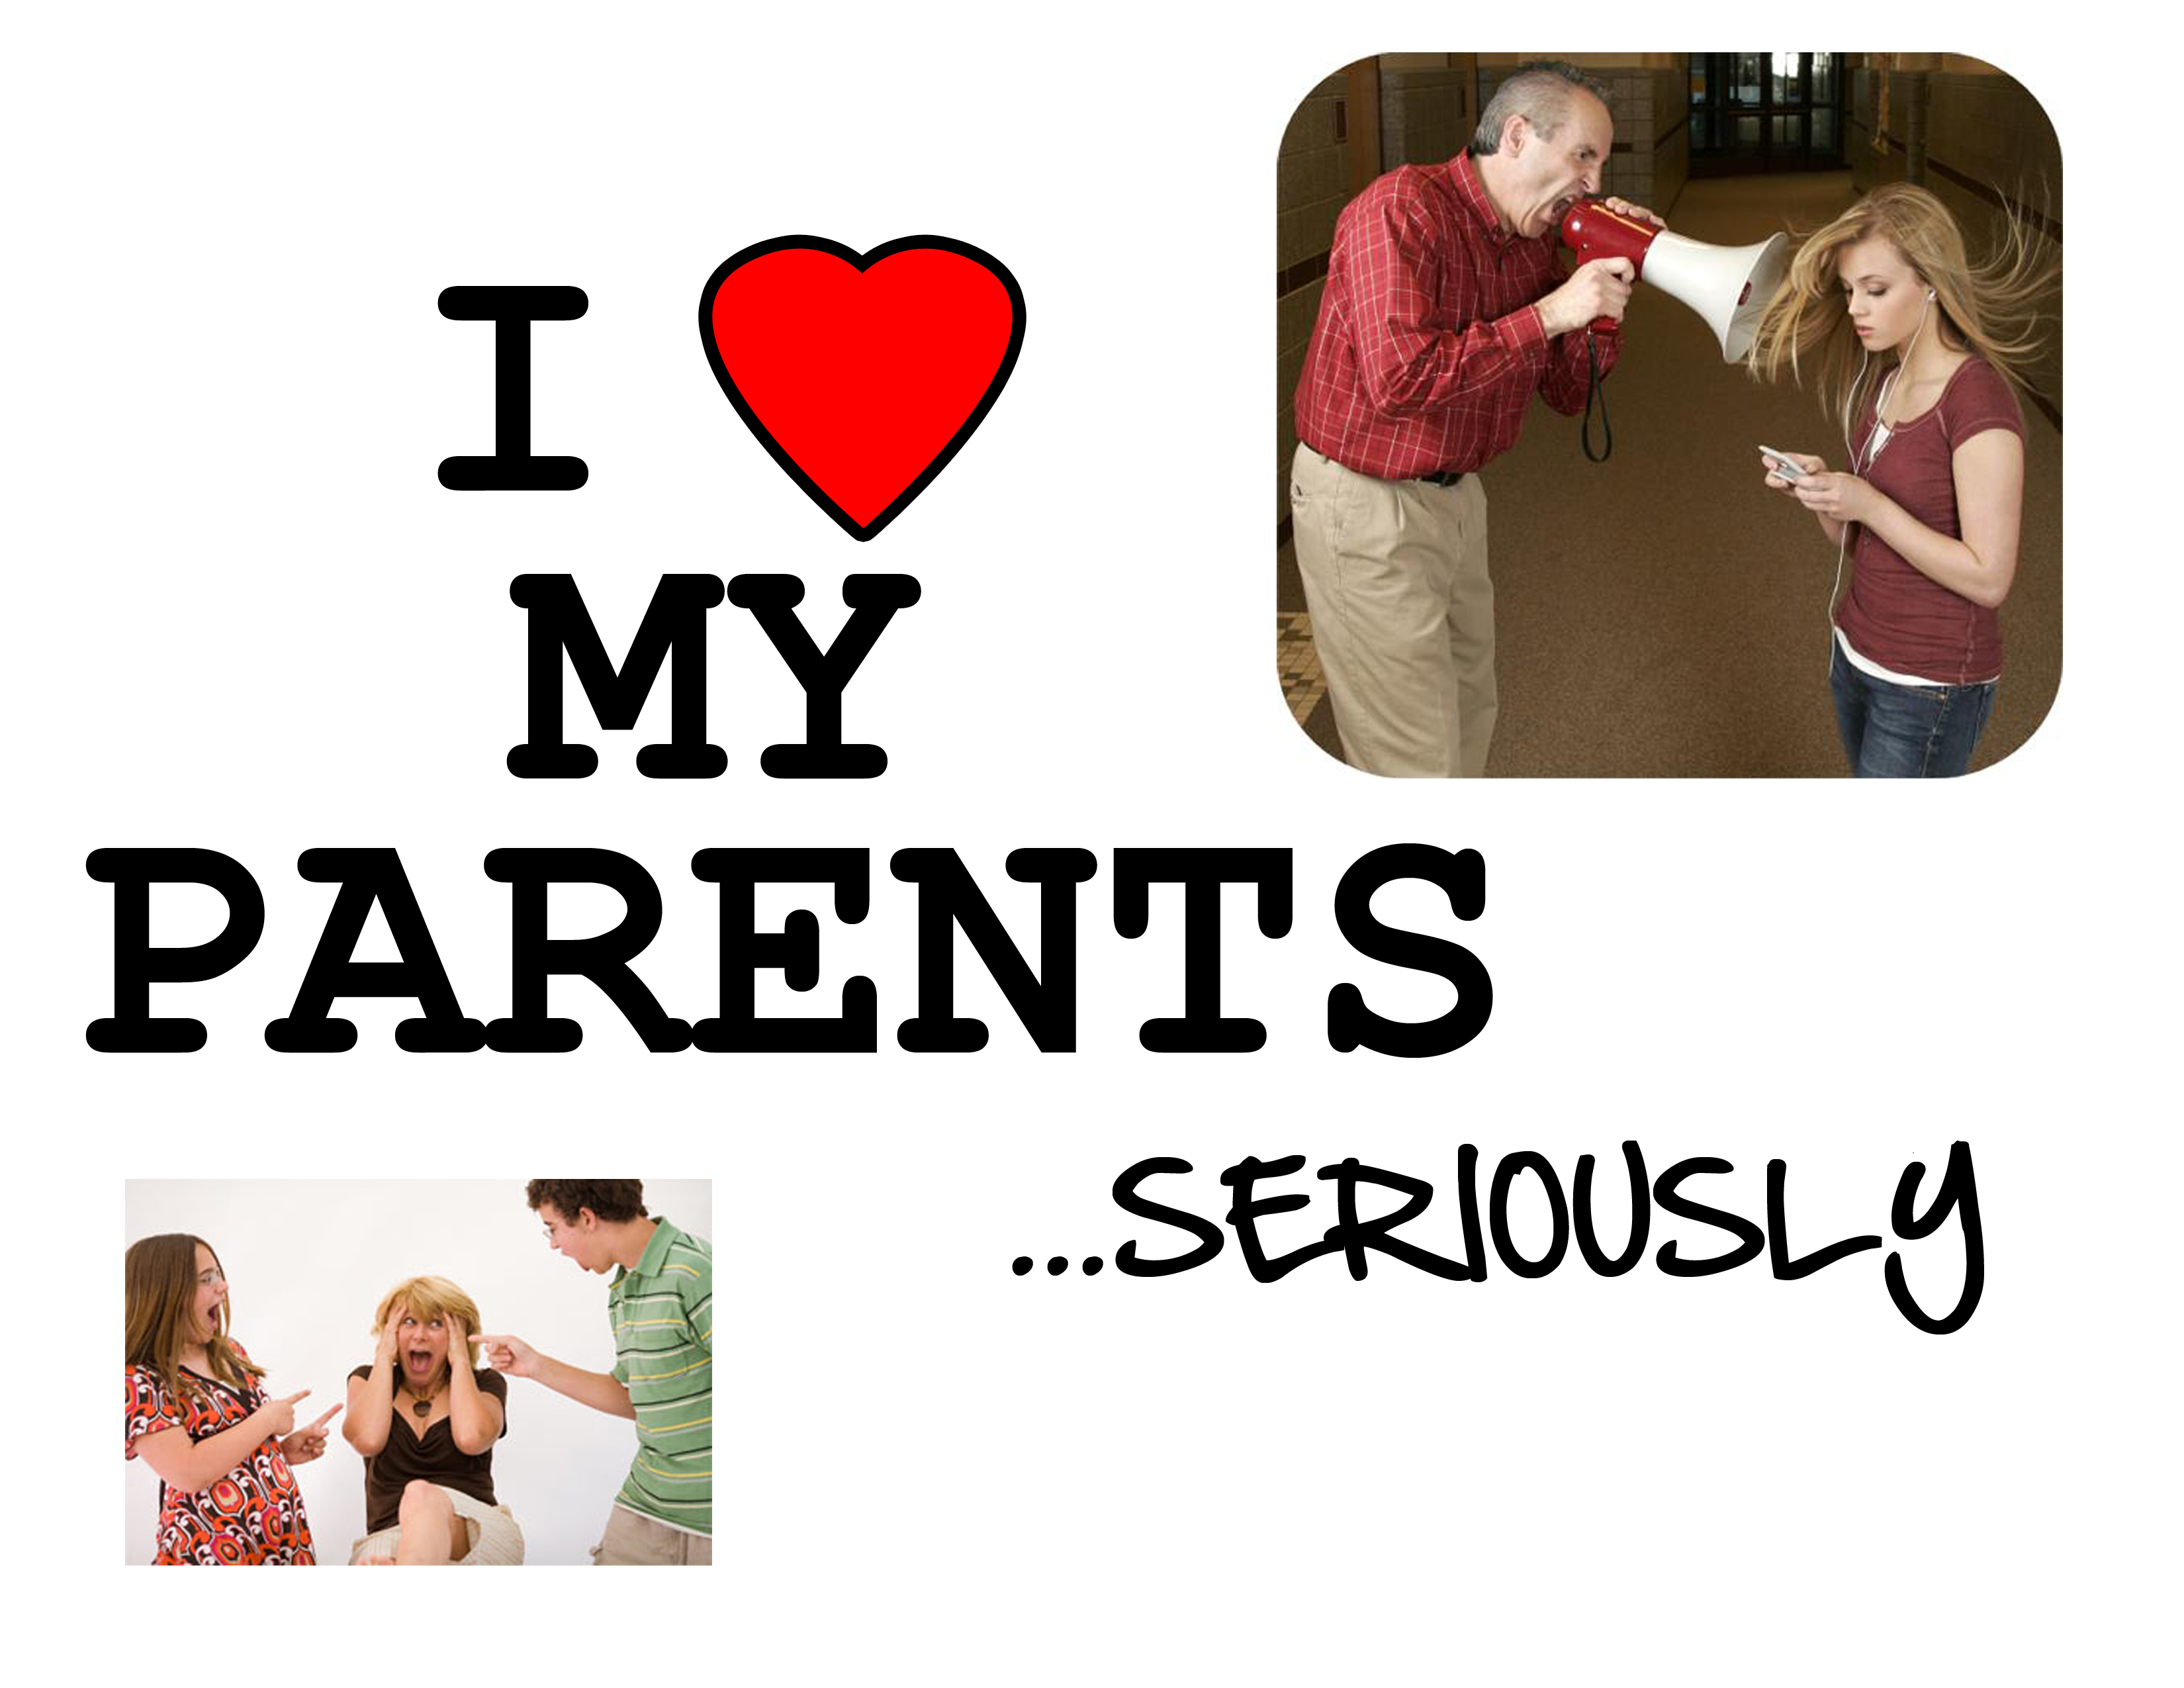 My parents go goes to work. I Love my parents. My parents. My parents Let me. My parents рисунок.